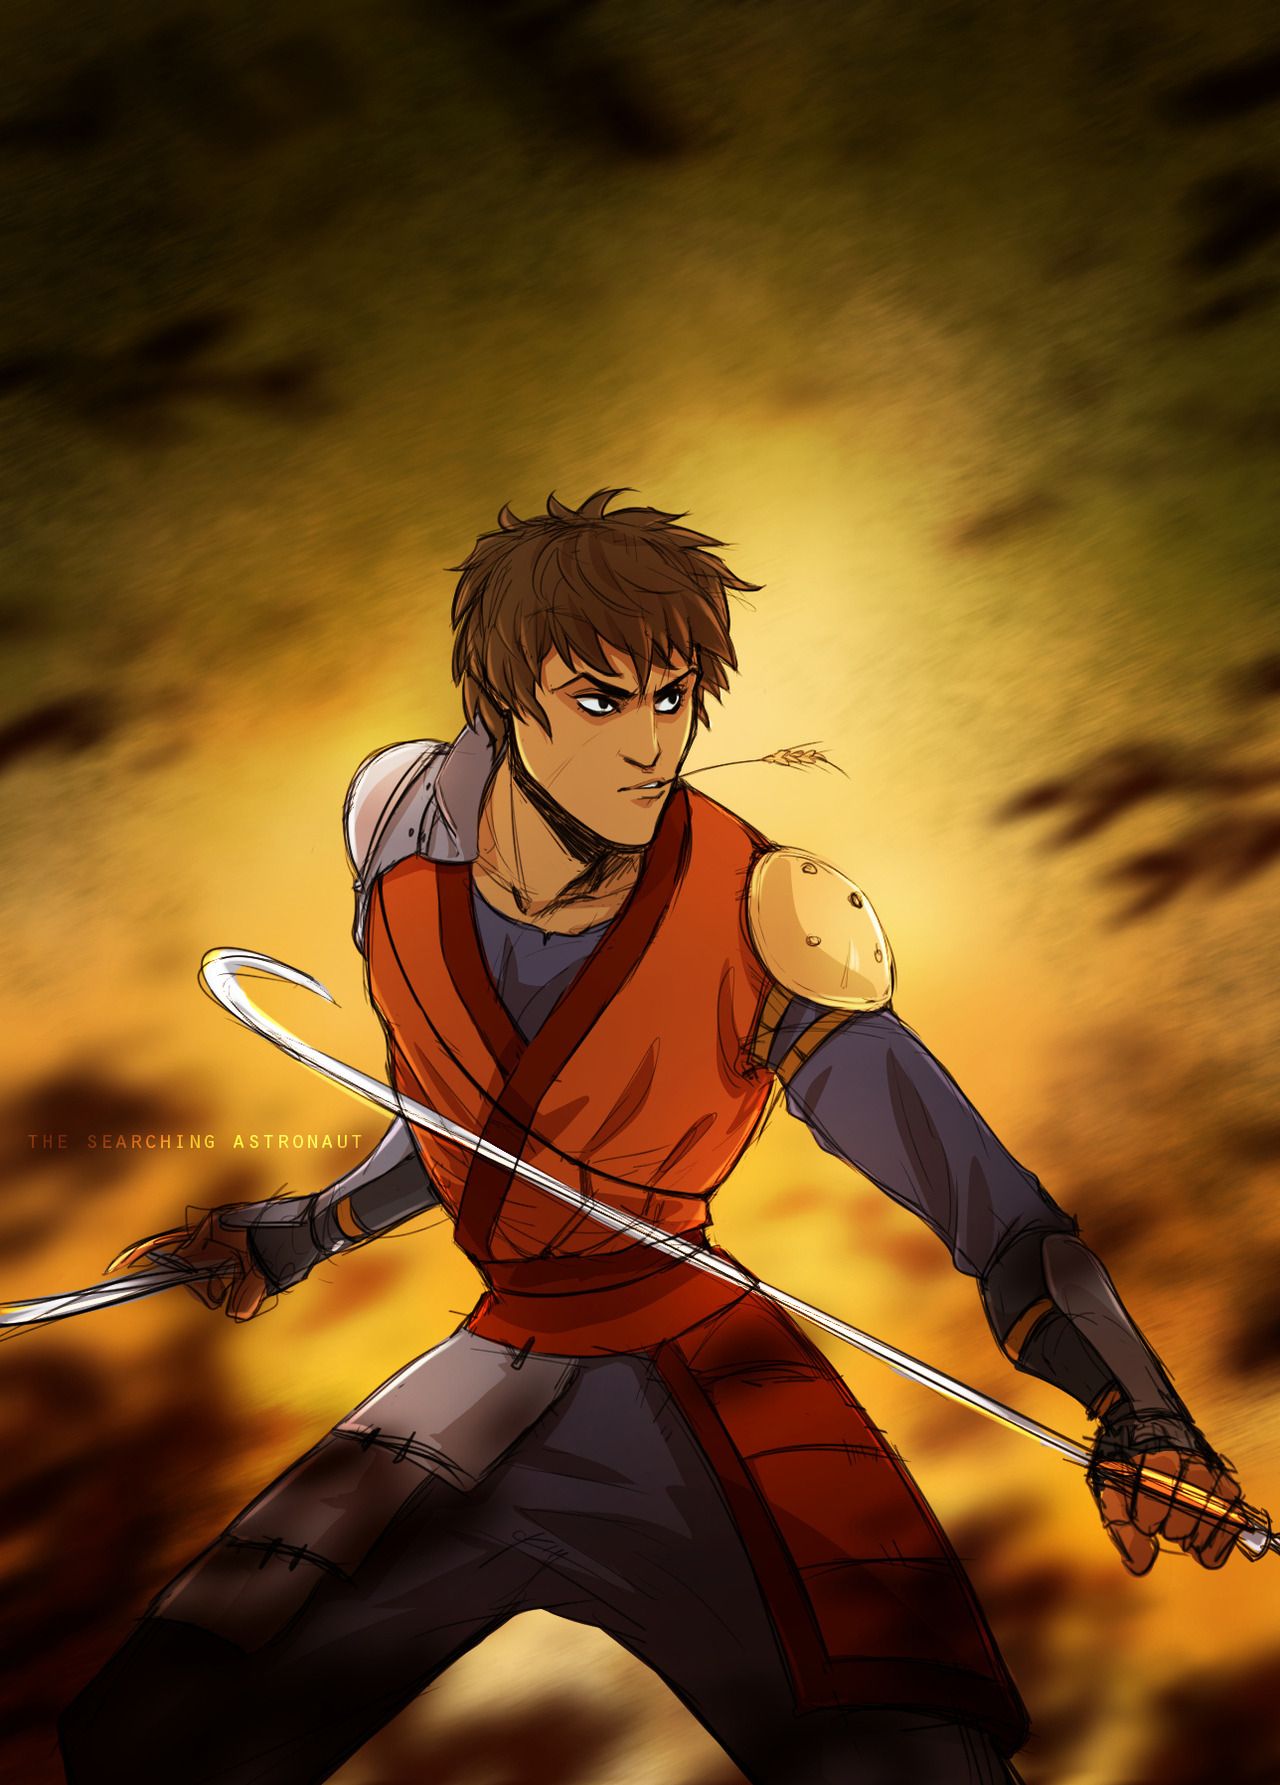 Avatar The Last Airbender 10 Jet Fan Art Pictures That Are Too Good